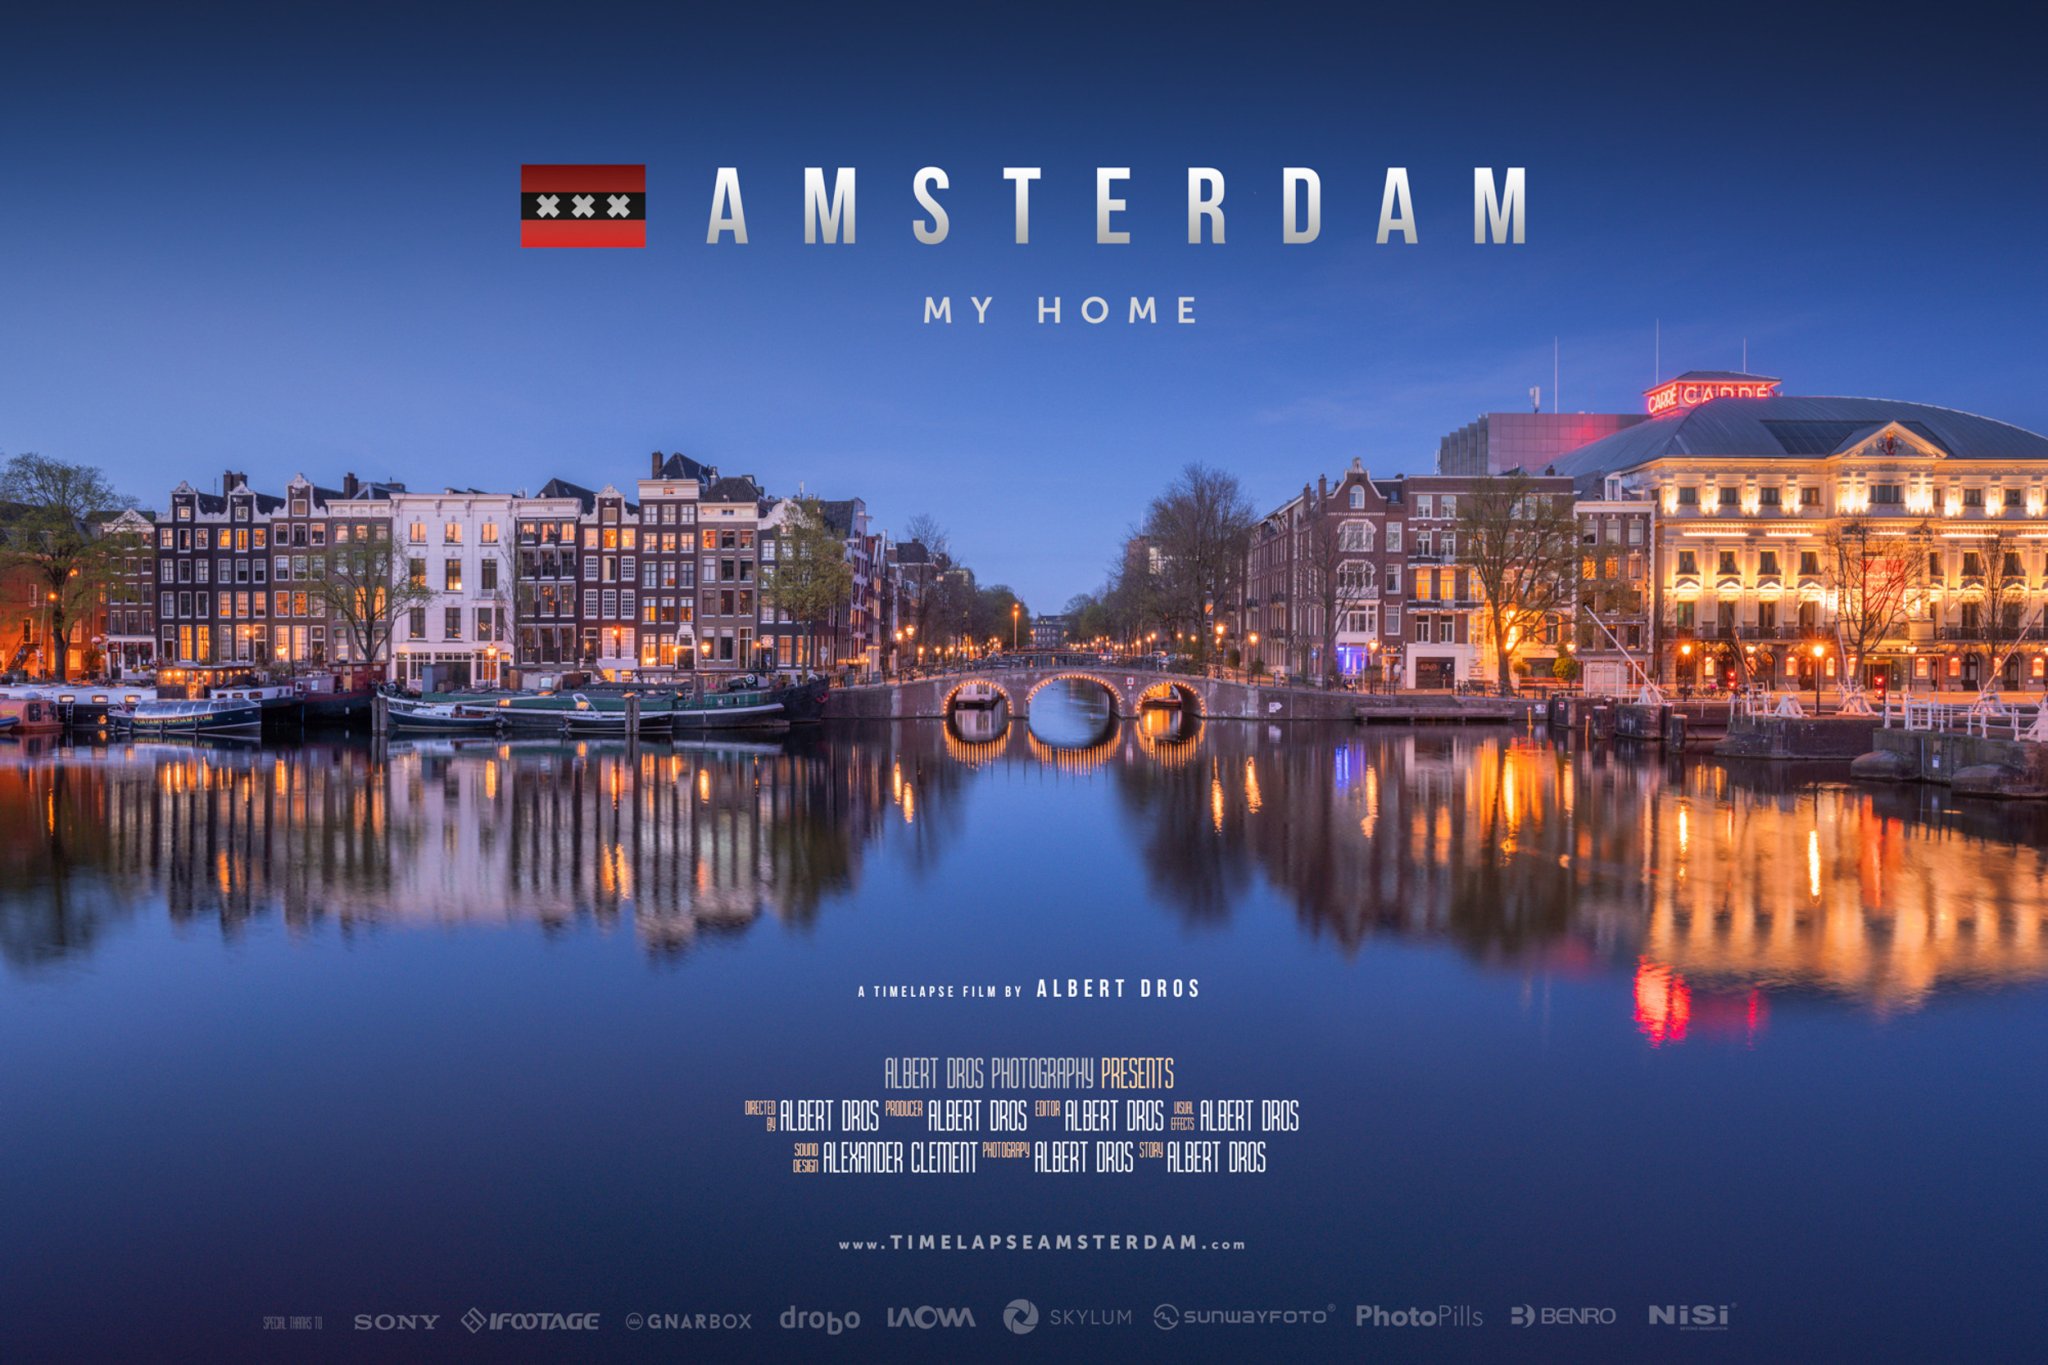 Amsterdam My Home | A Timelapse film by Albert Dros